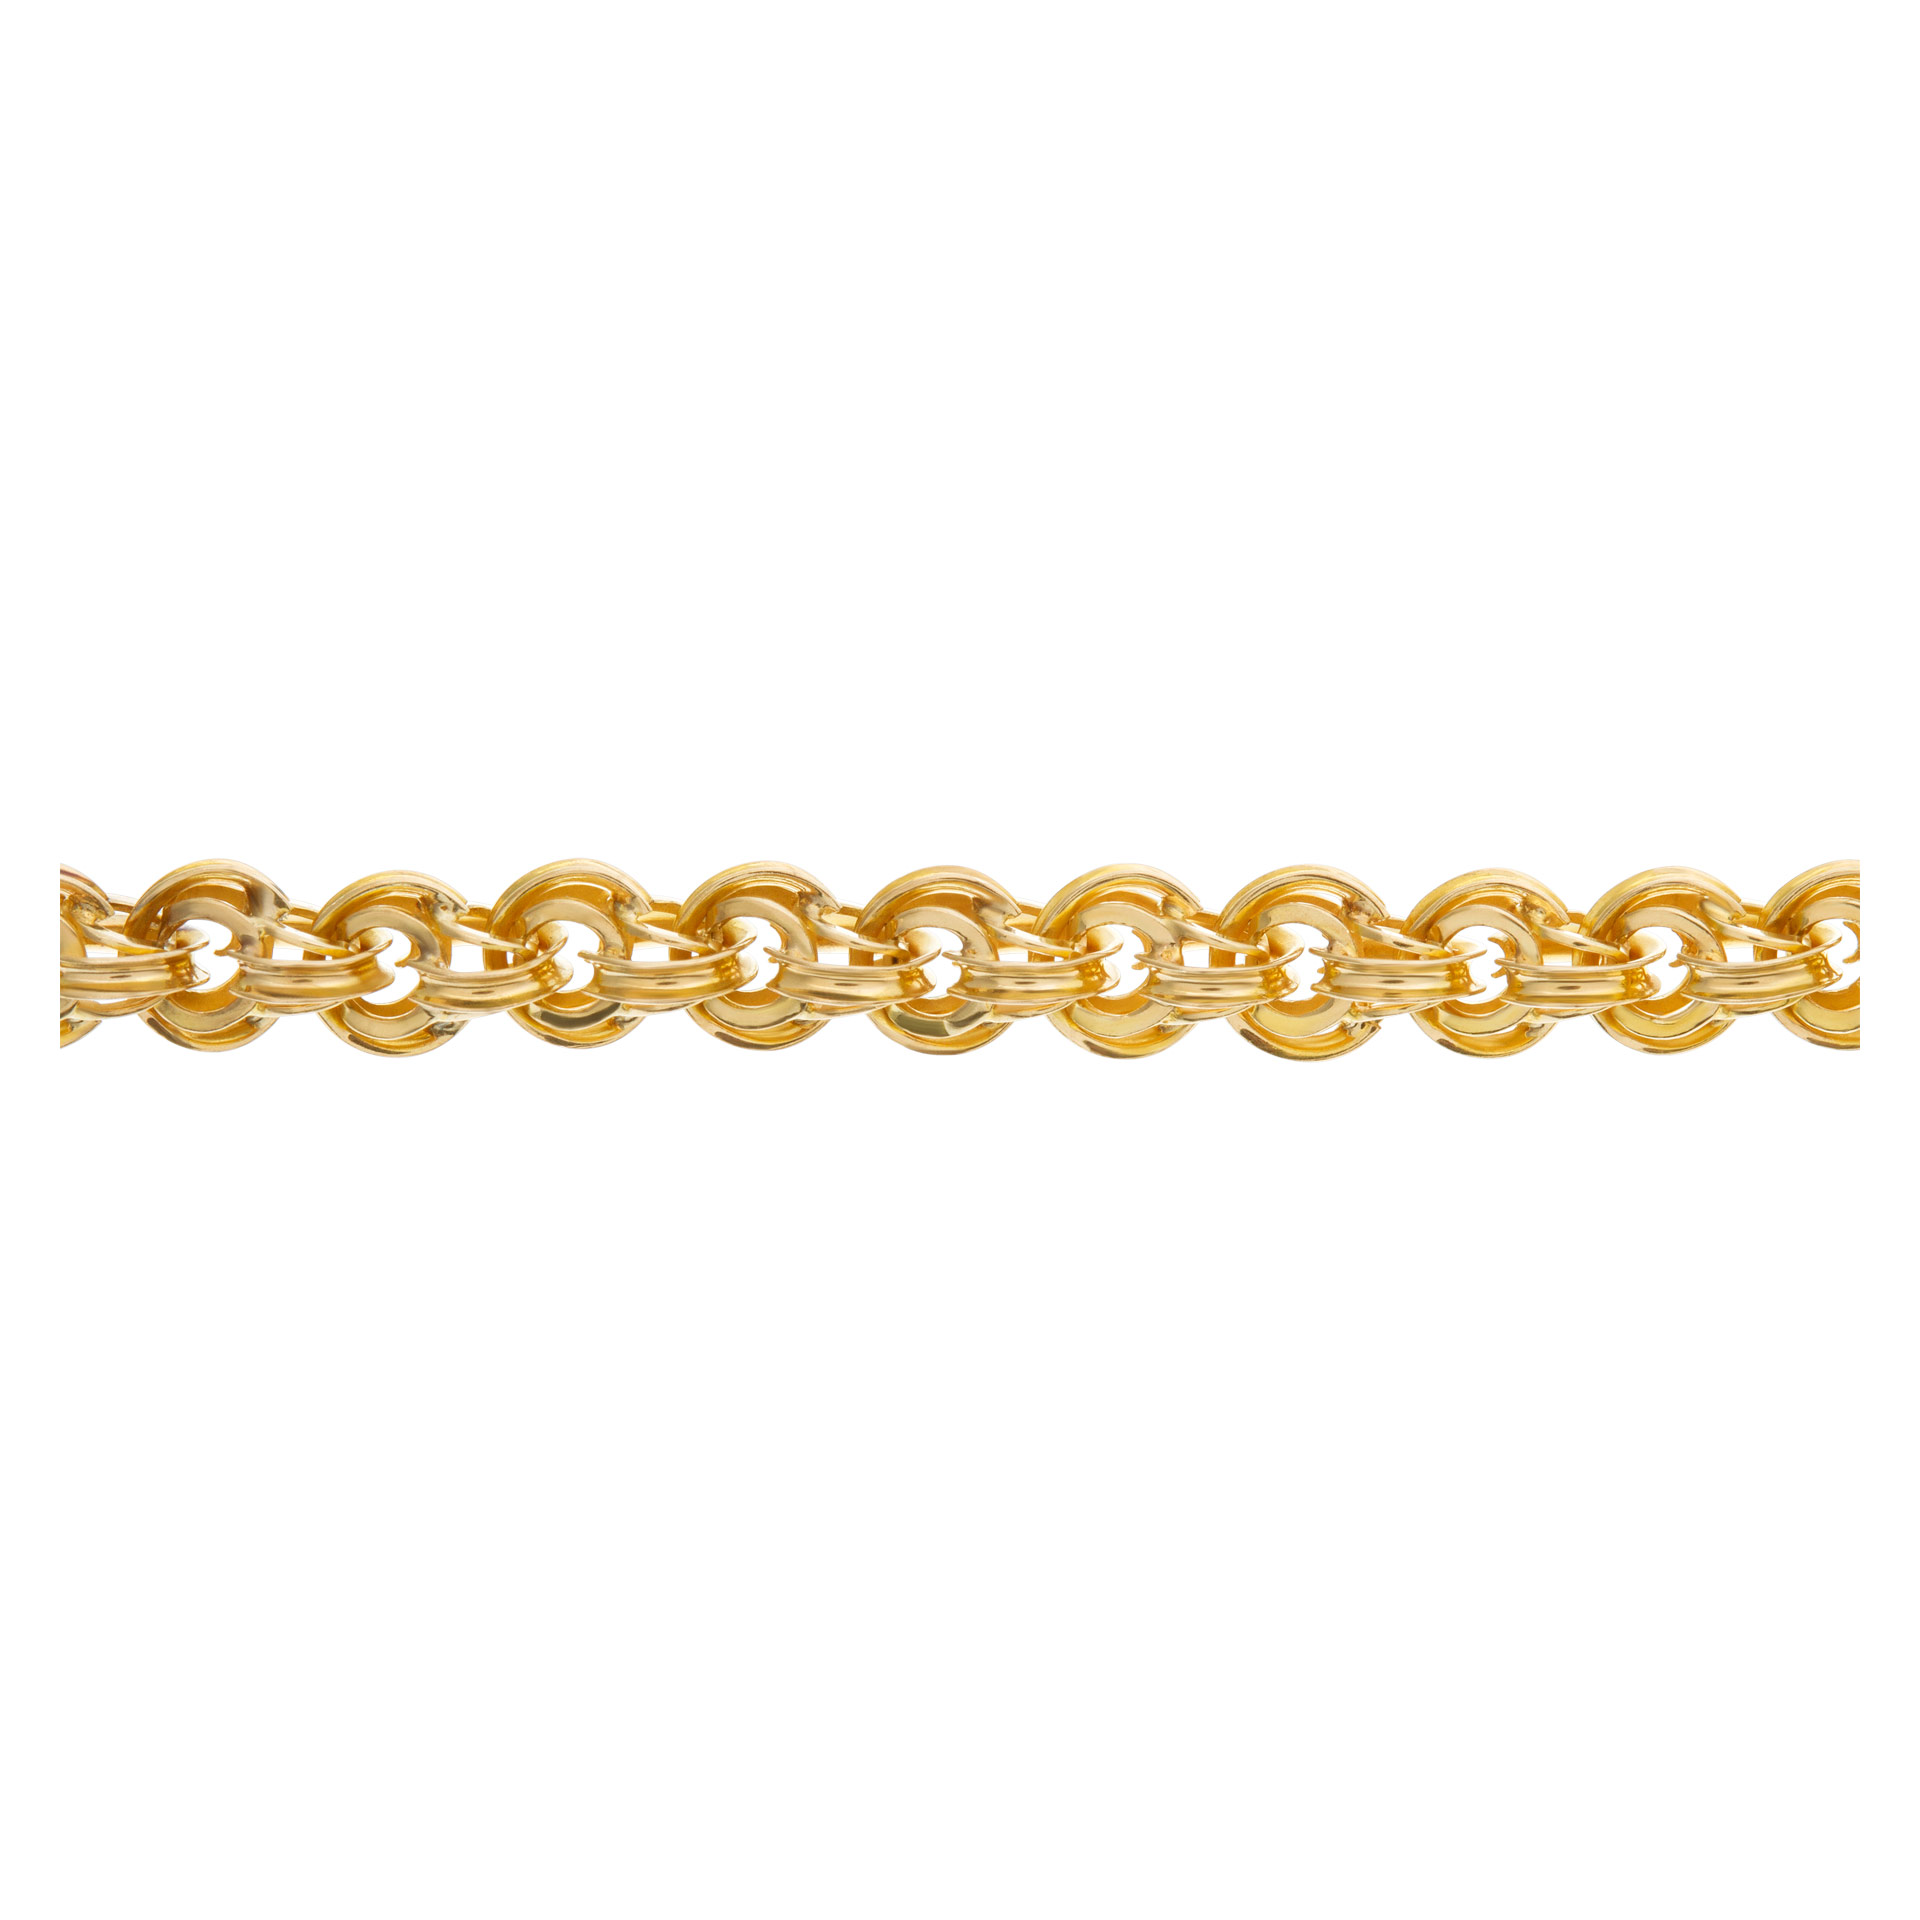 Intricate 14k yellow gold link necklace. Width: 4.8mm. Length: 20 inches. image 2